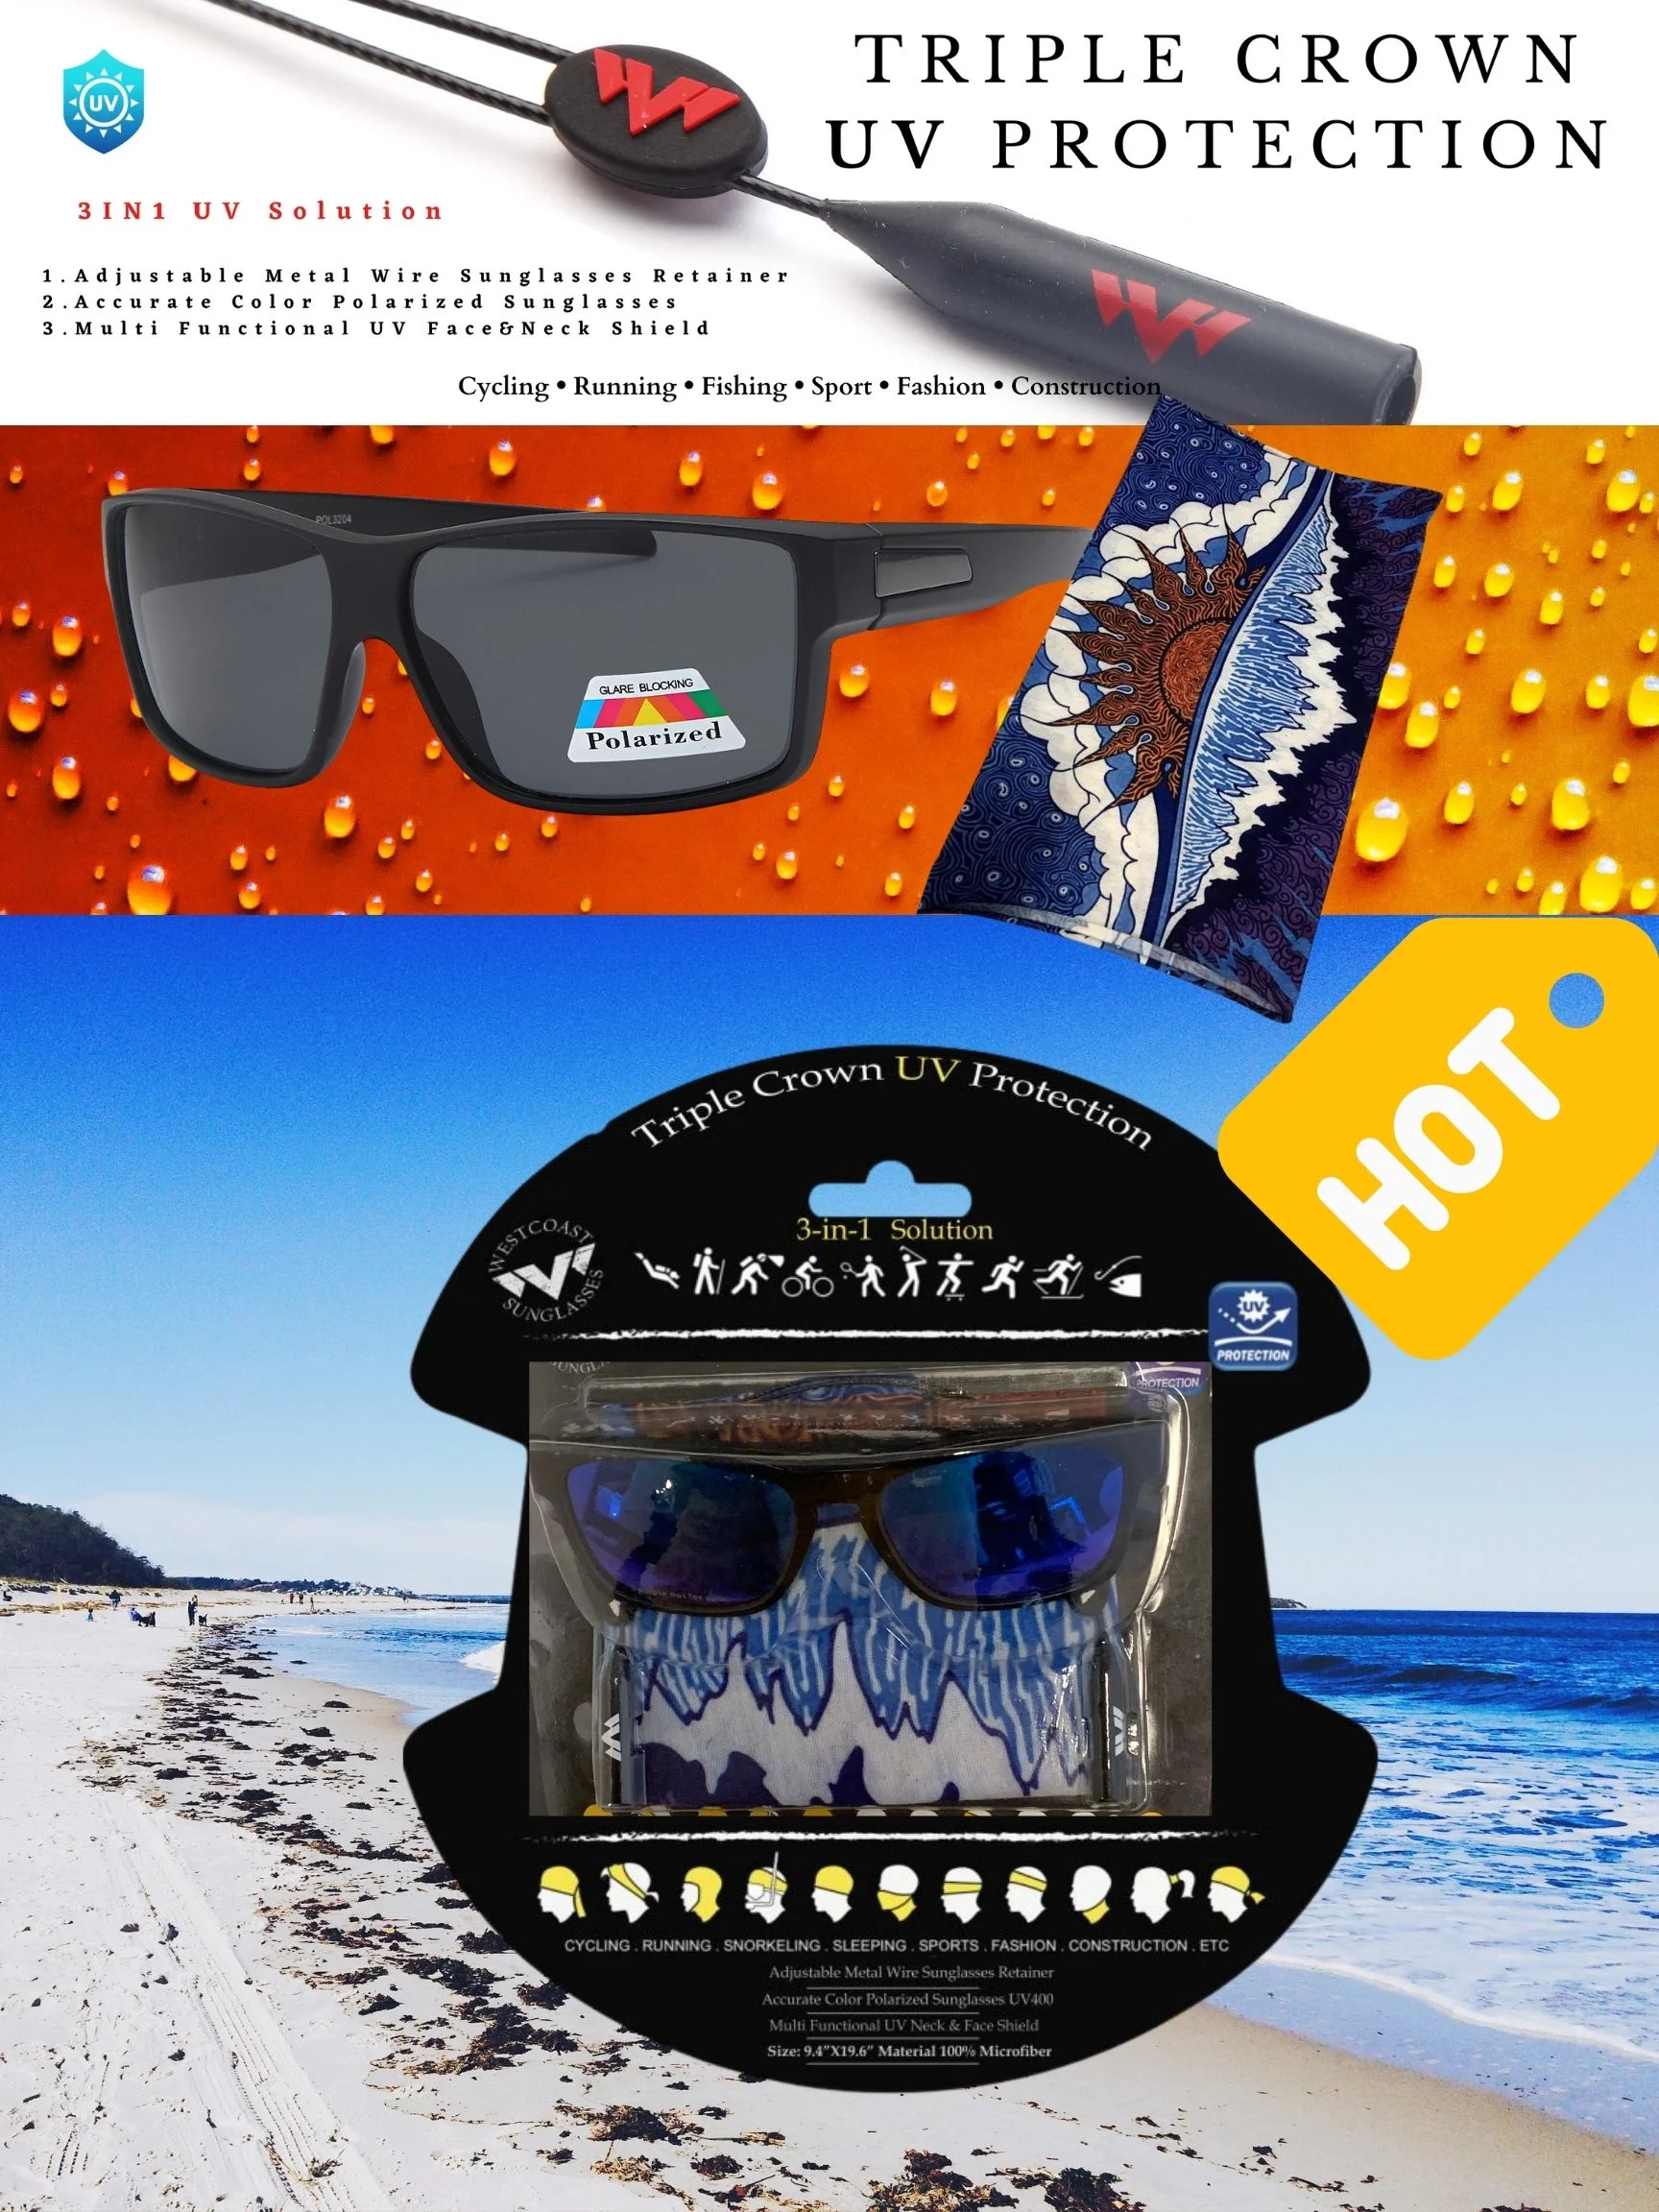 Triple Crown UV Protection - 3 in 1 Solution